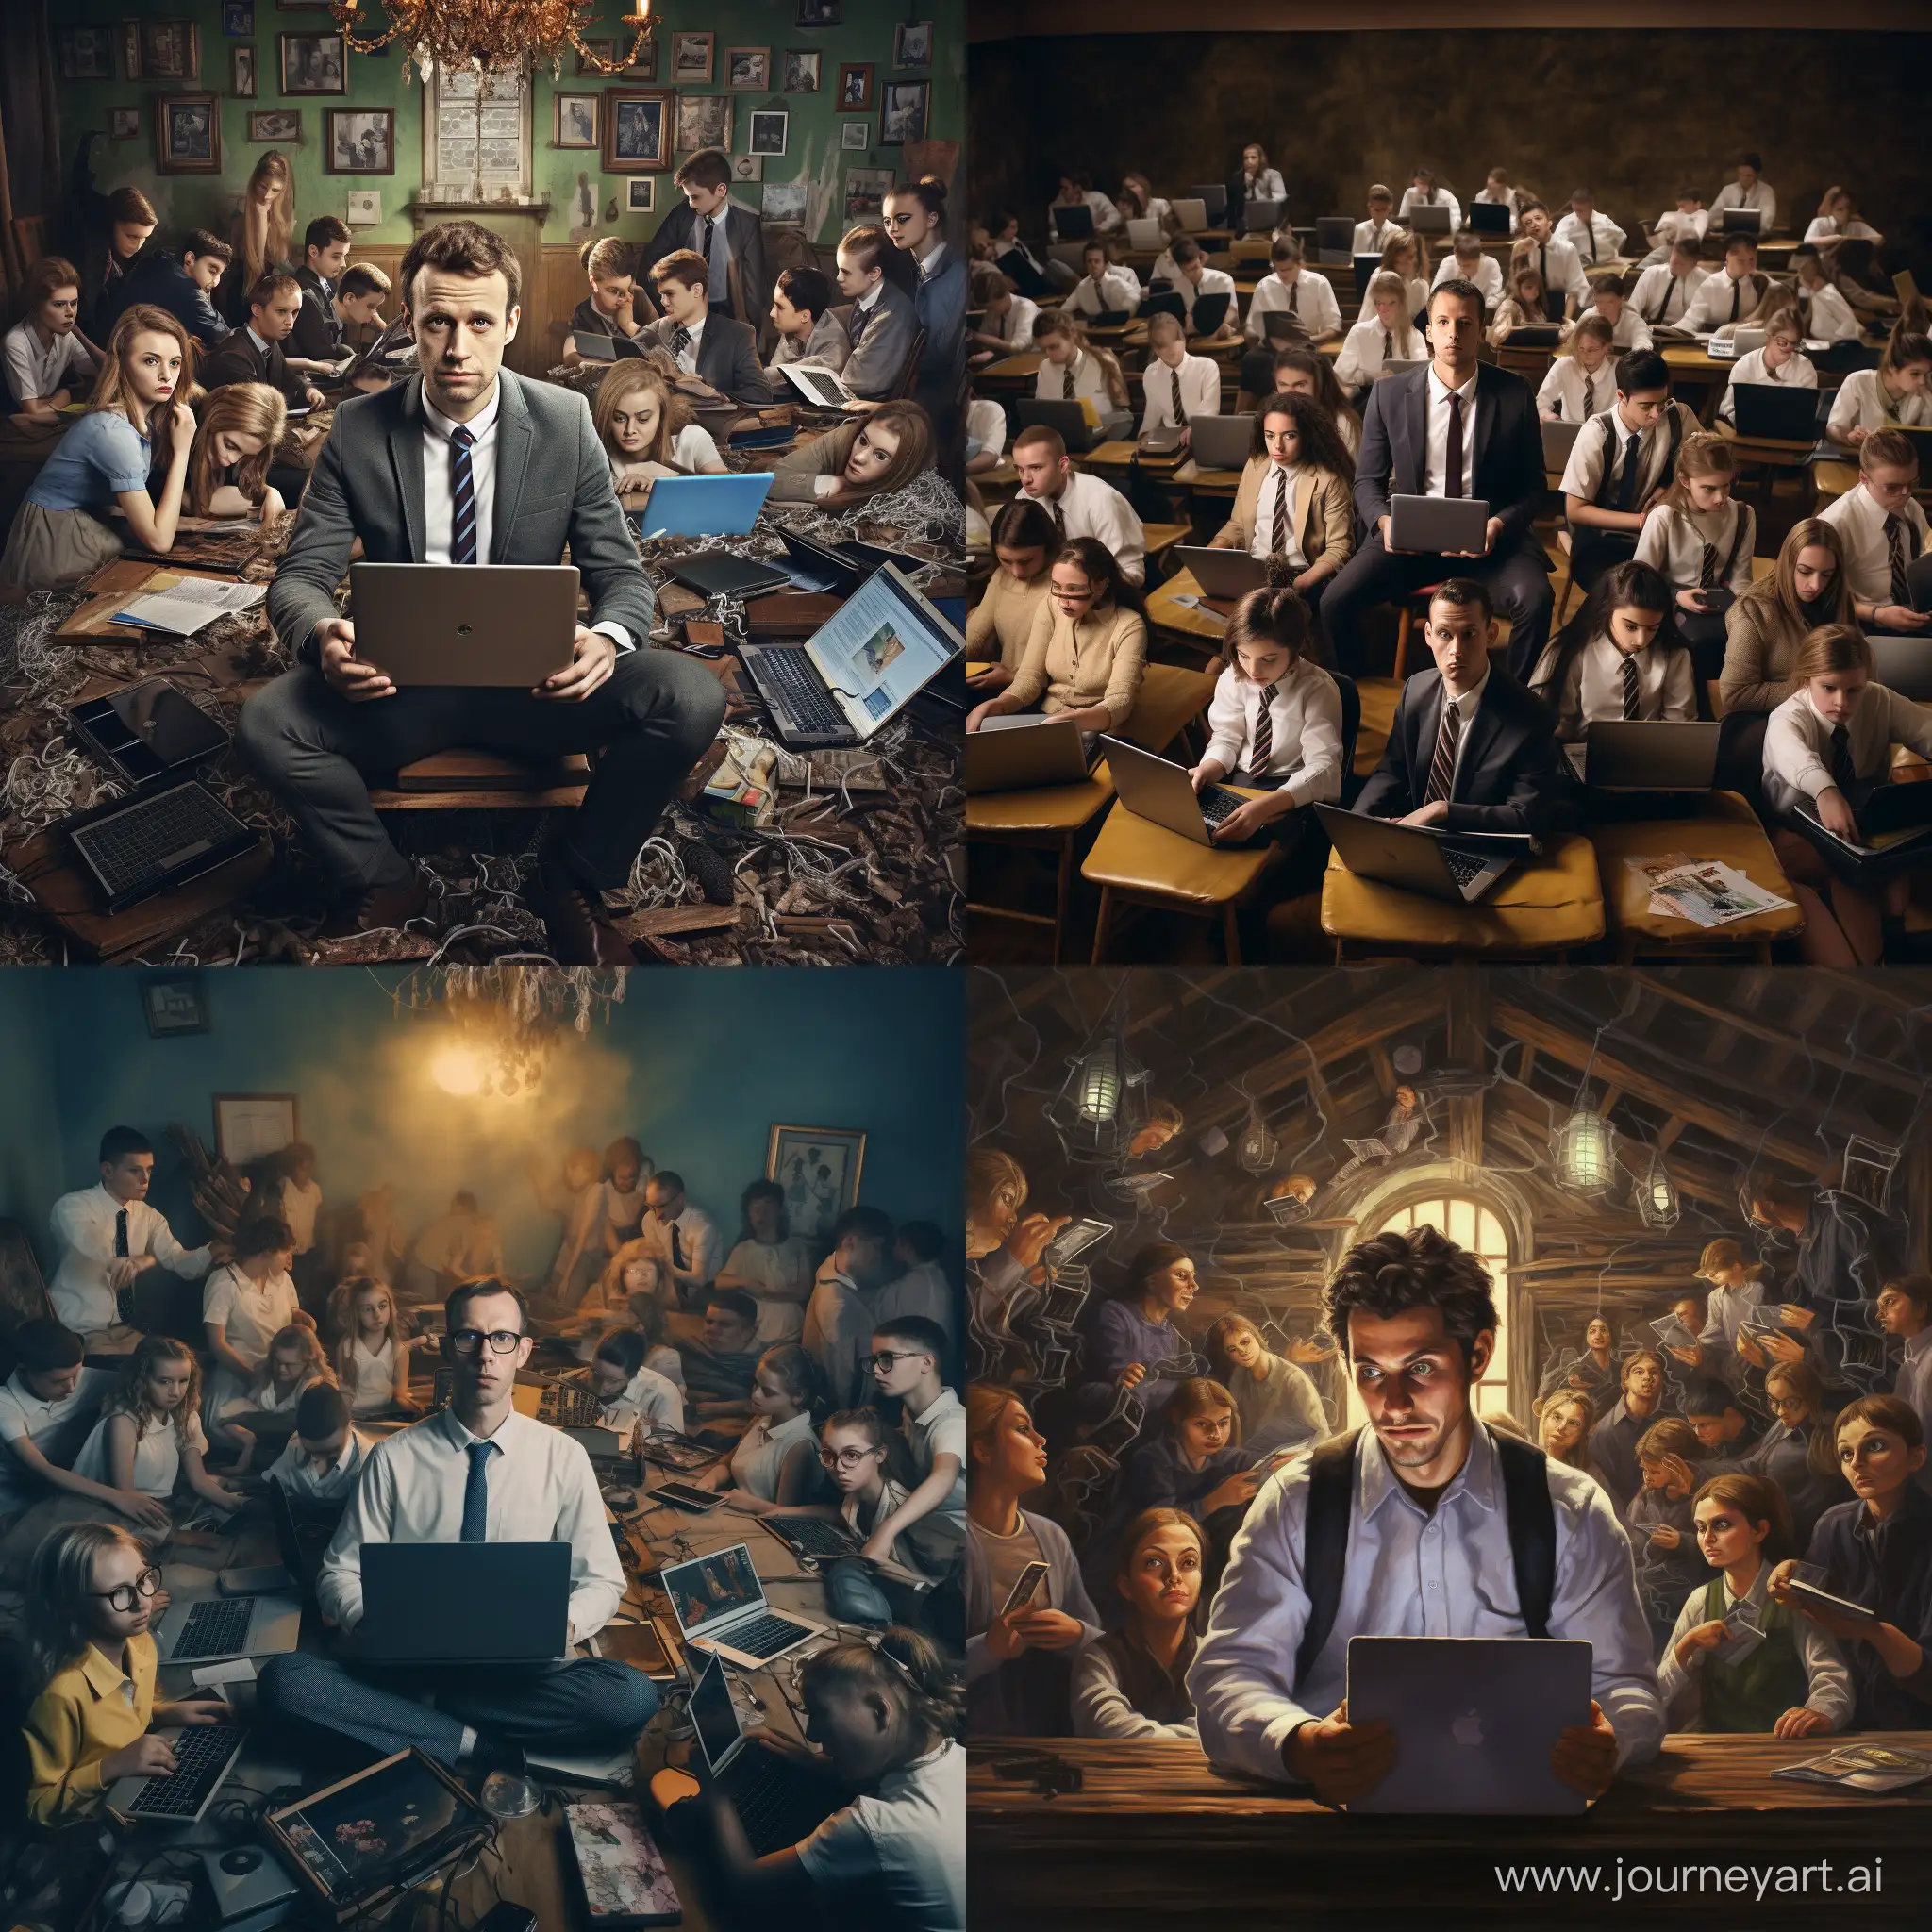 Dedicated-Teacher-Engaging-11-Learning-with-Laptops-and-Students